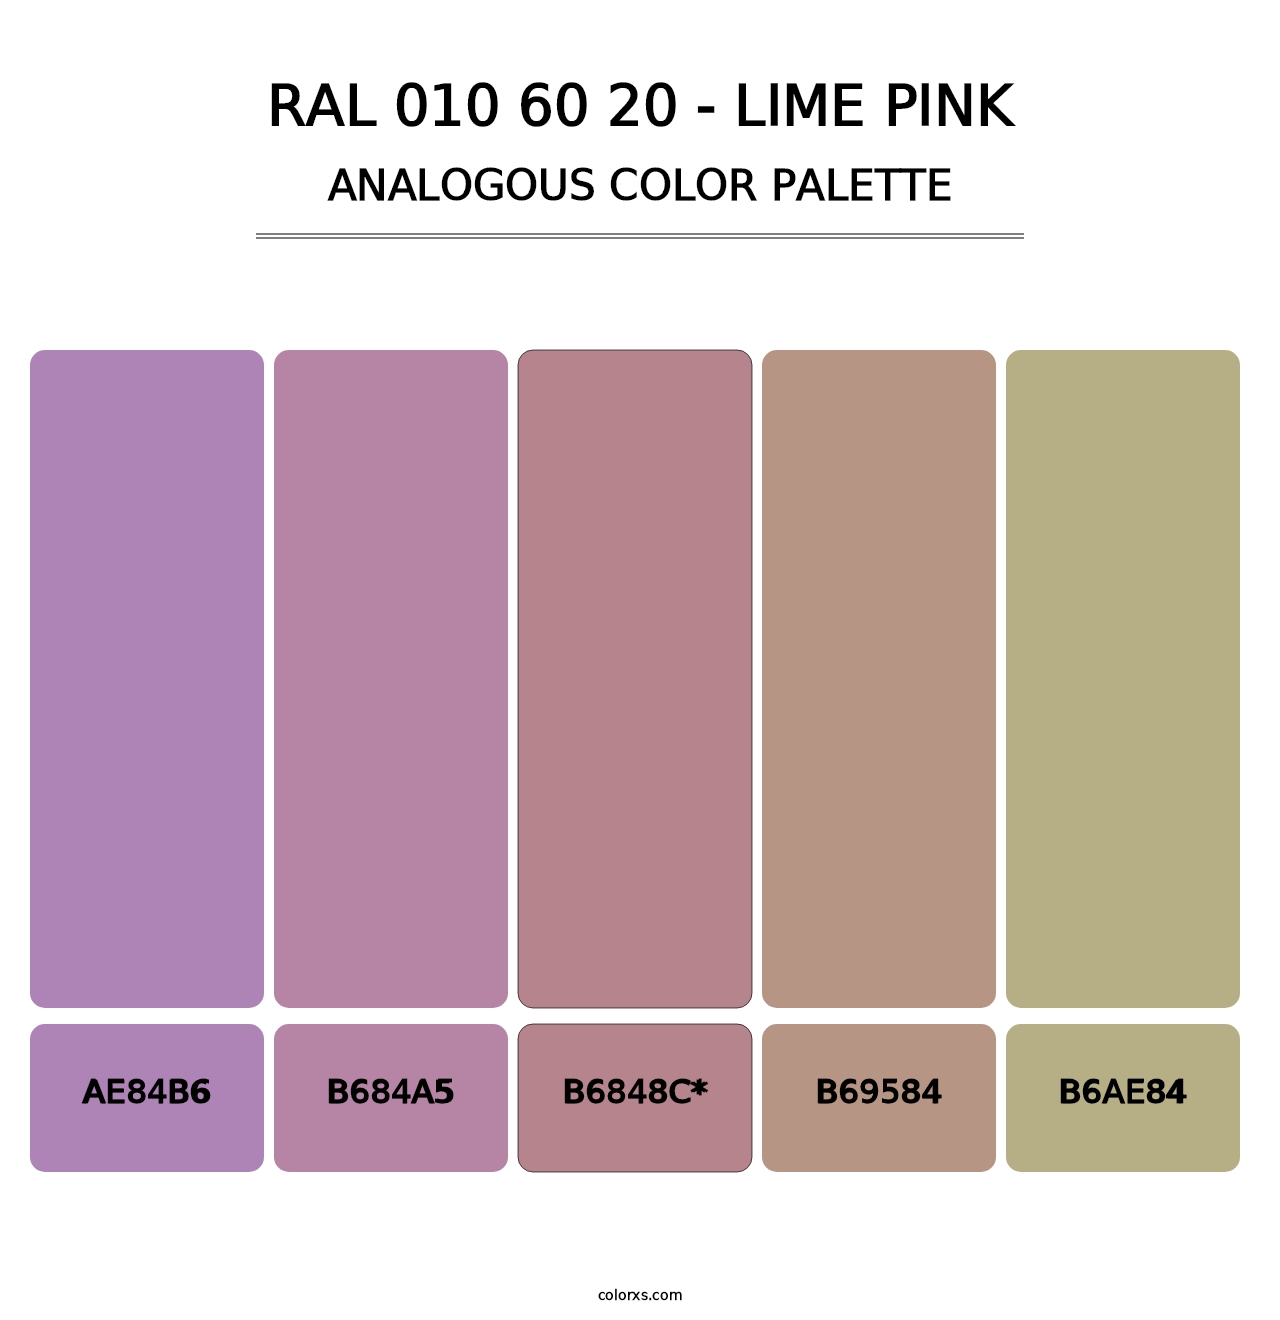 RAL 010 60 20 - Lime Pink - Analogous Color Palette